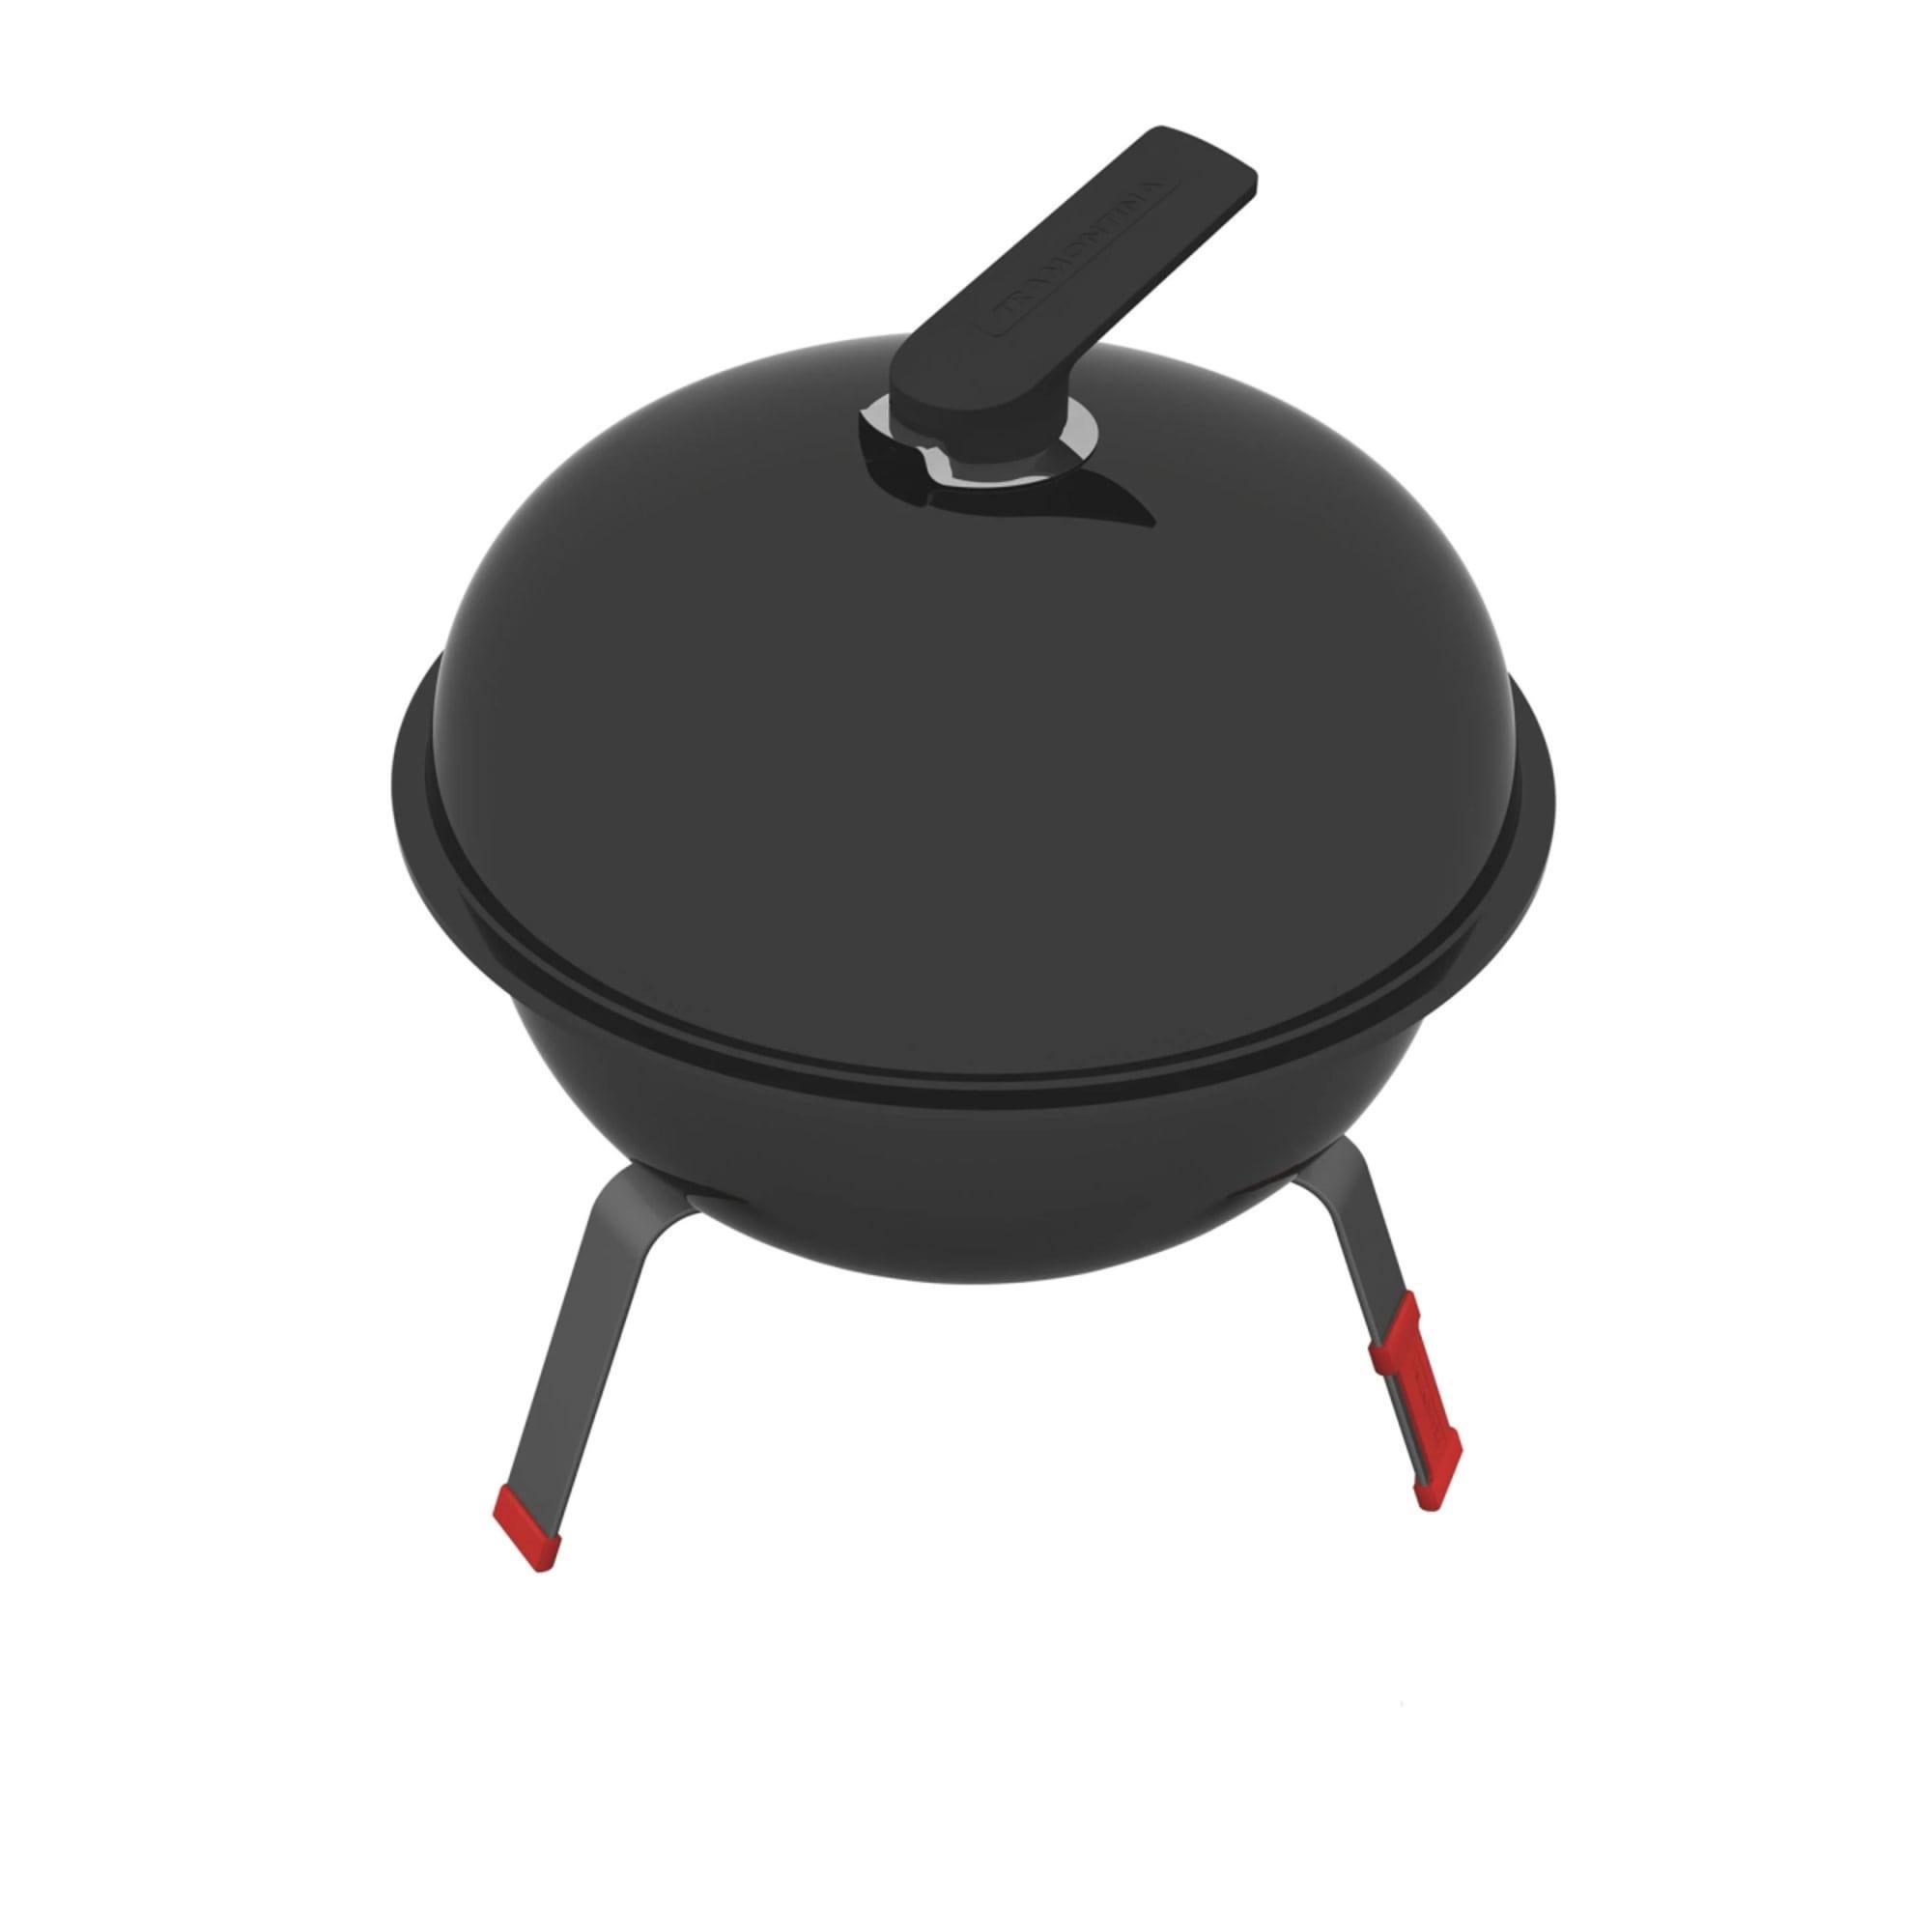 Tramontina Churrasco Charcoal Barbecue Grill Image 4